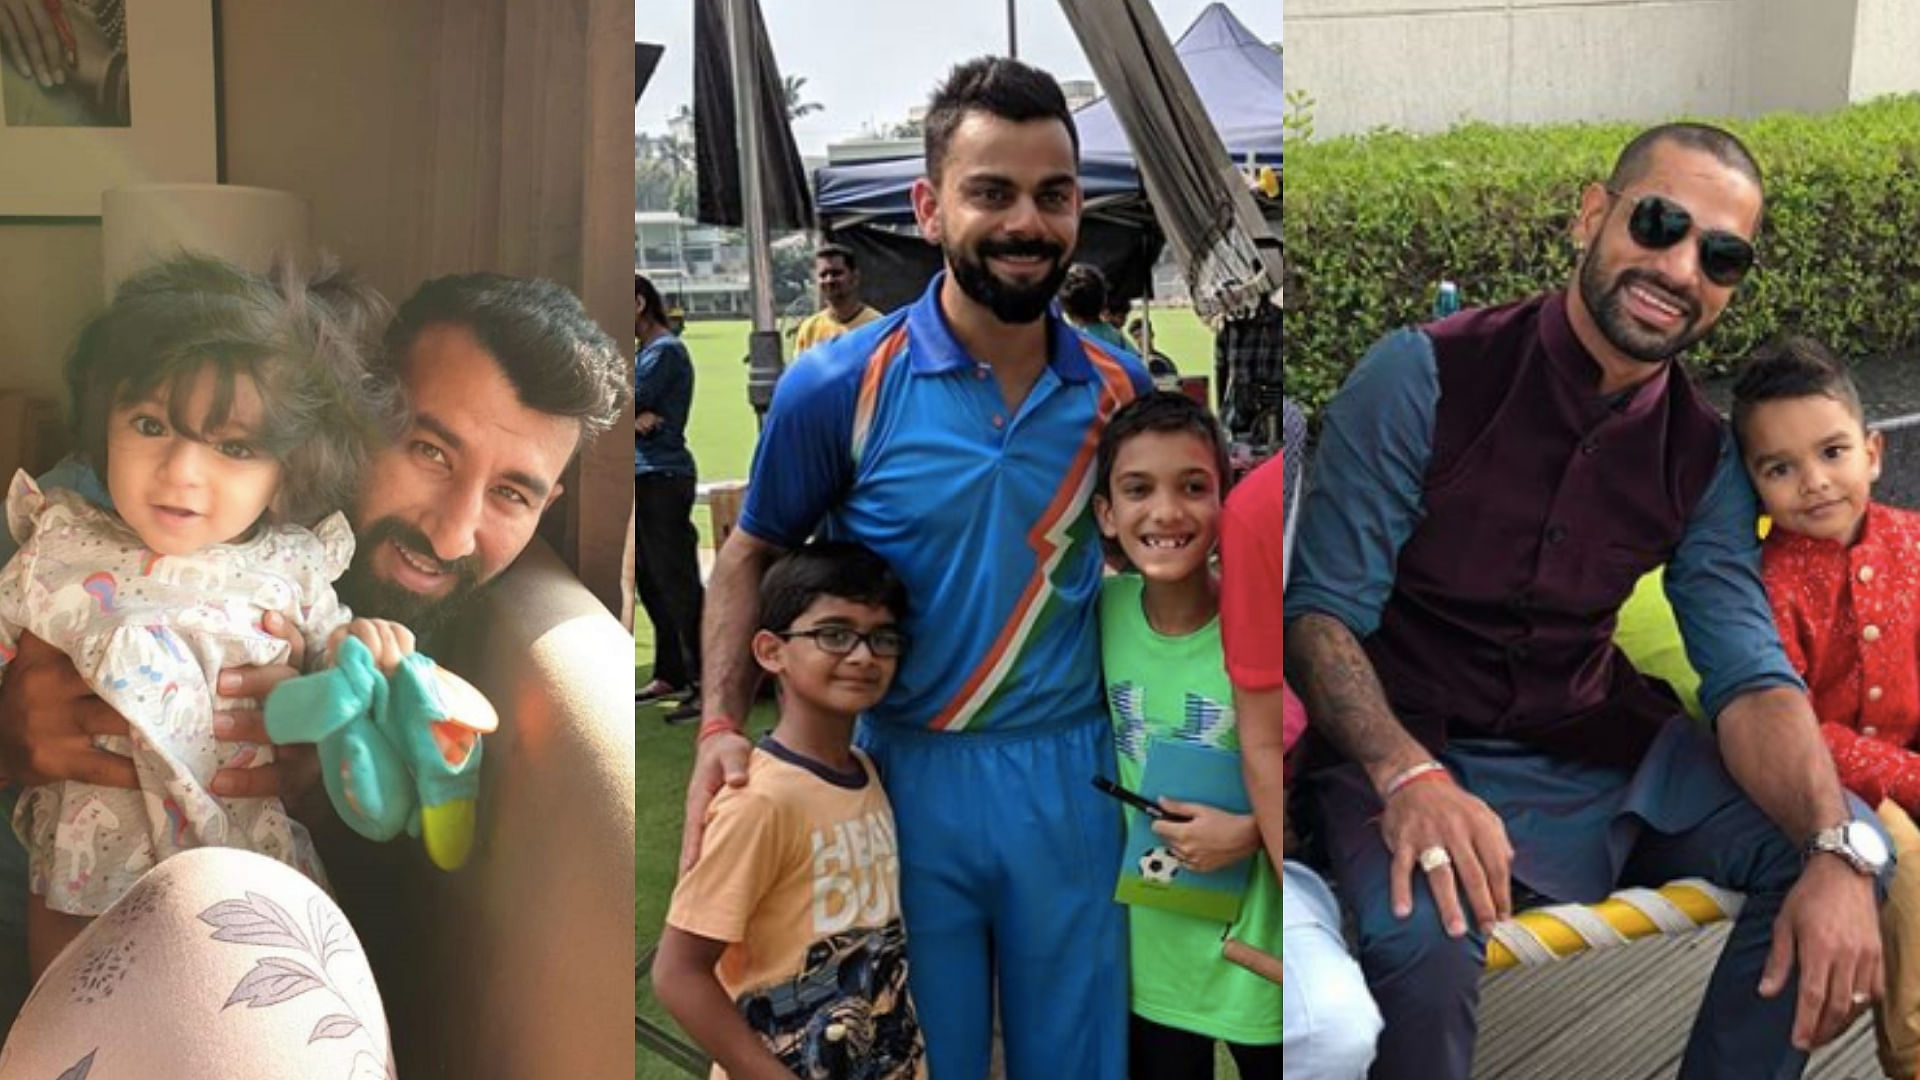 Cheteshwar Pujara posted a picture with his toddler Aditi while Shikhar Dhawan uploaded a video with son Zoraver.